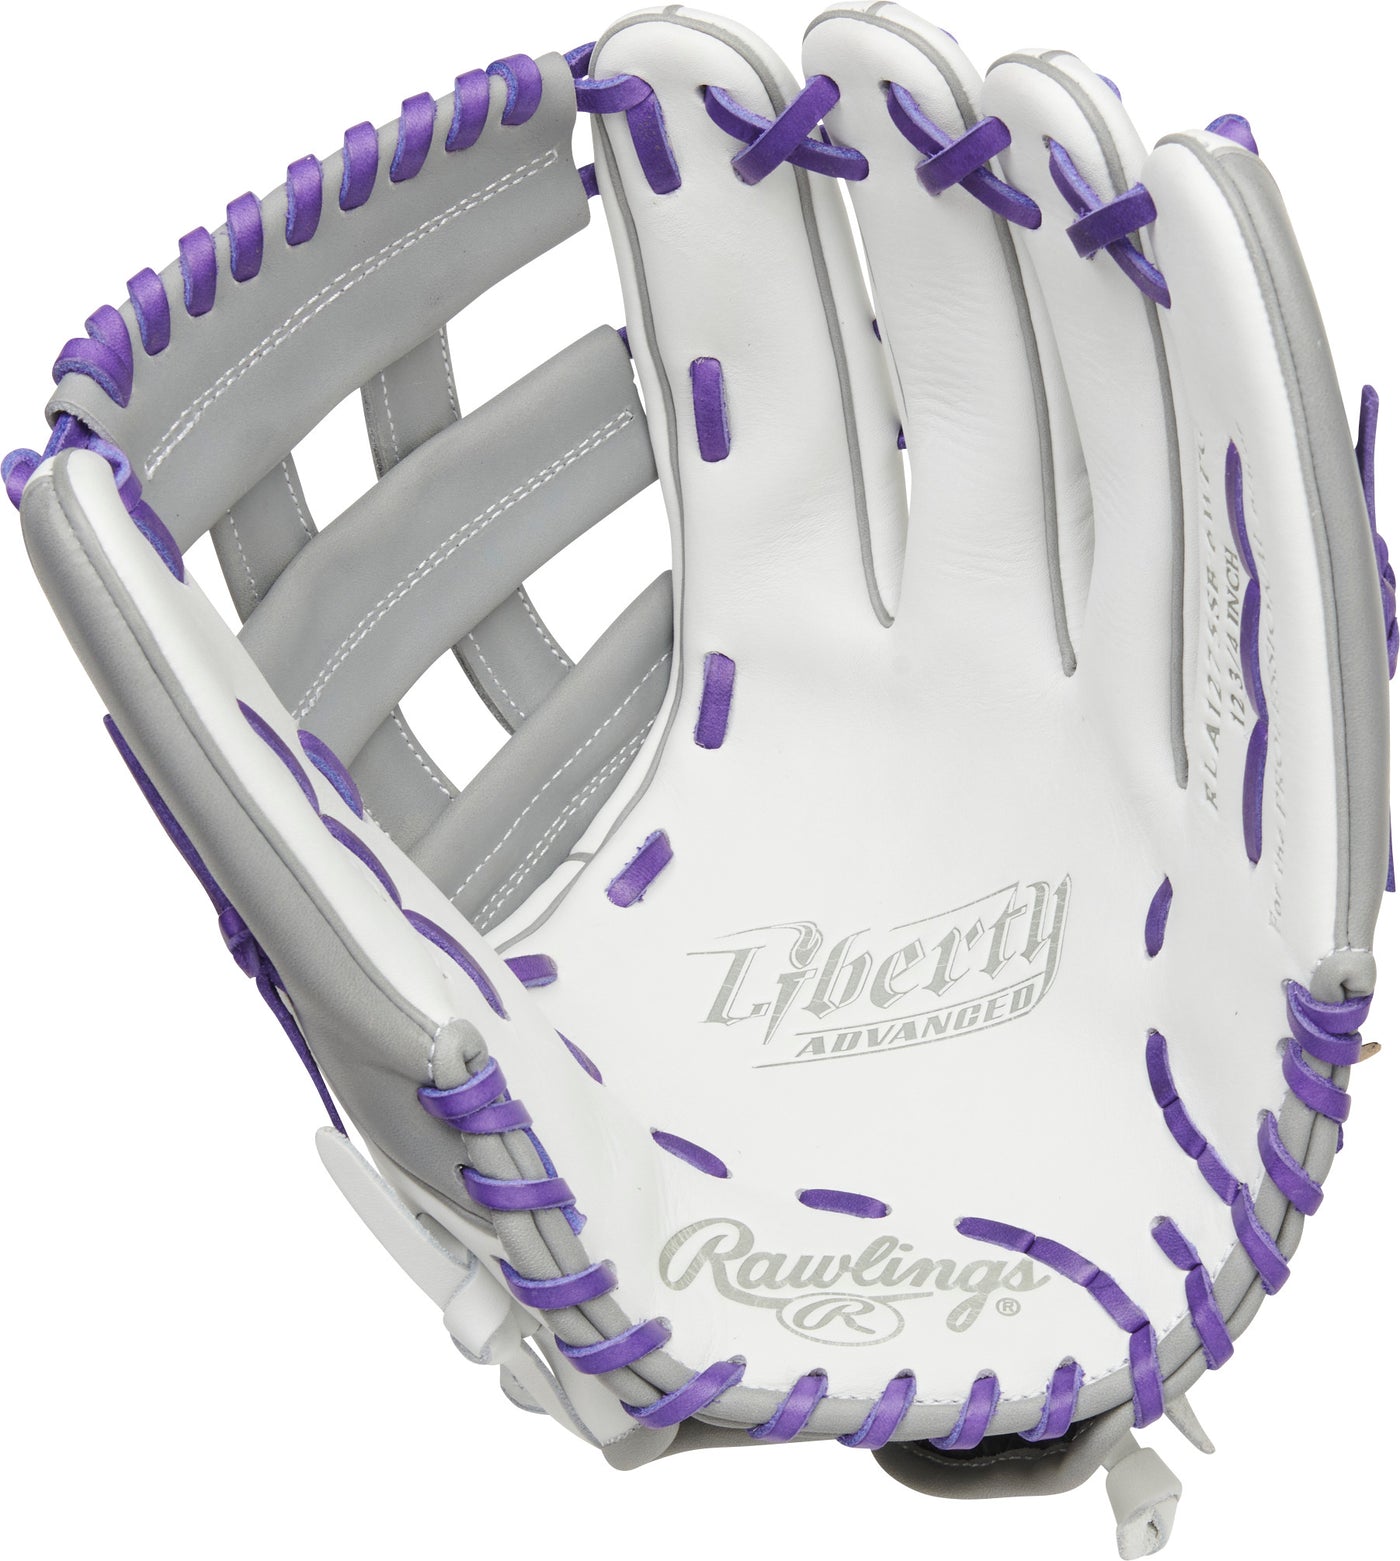 Sports – Advanced Outfield RLA1275SB Series HB Color Glove: Rawlings 12.75 Liberty